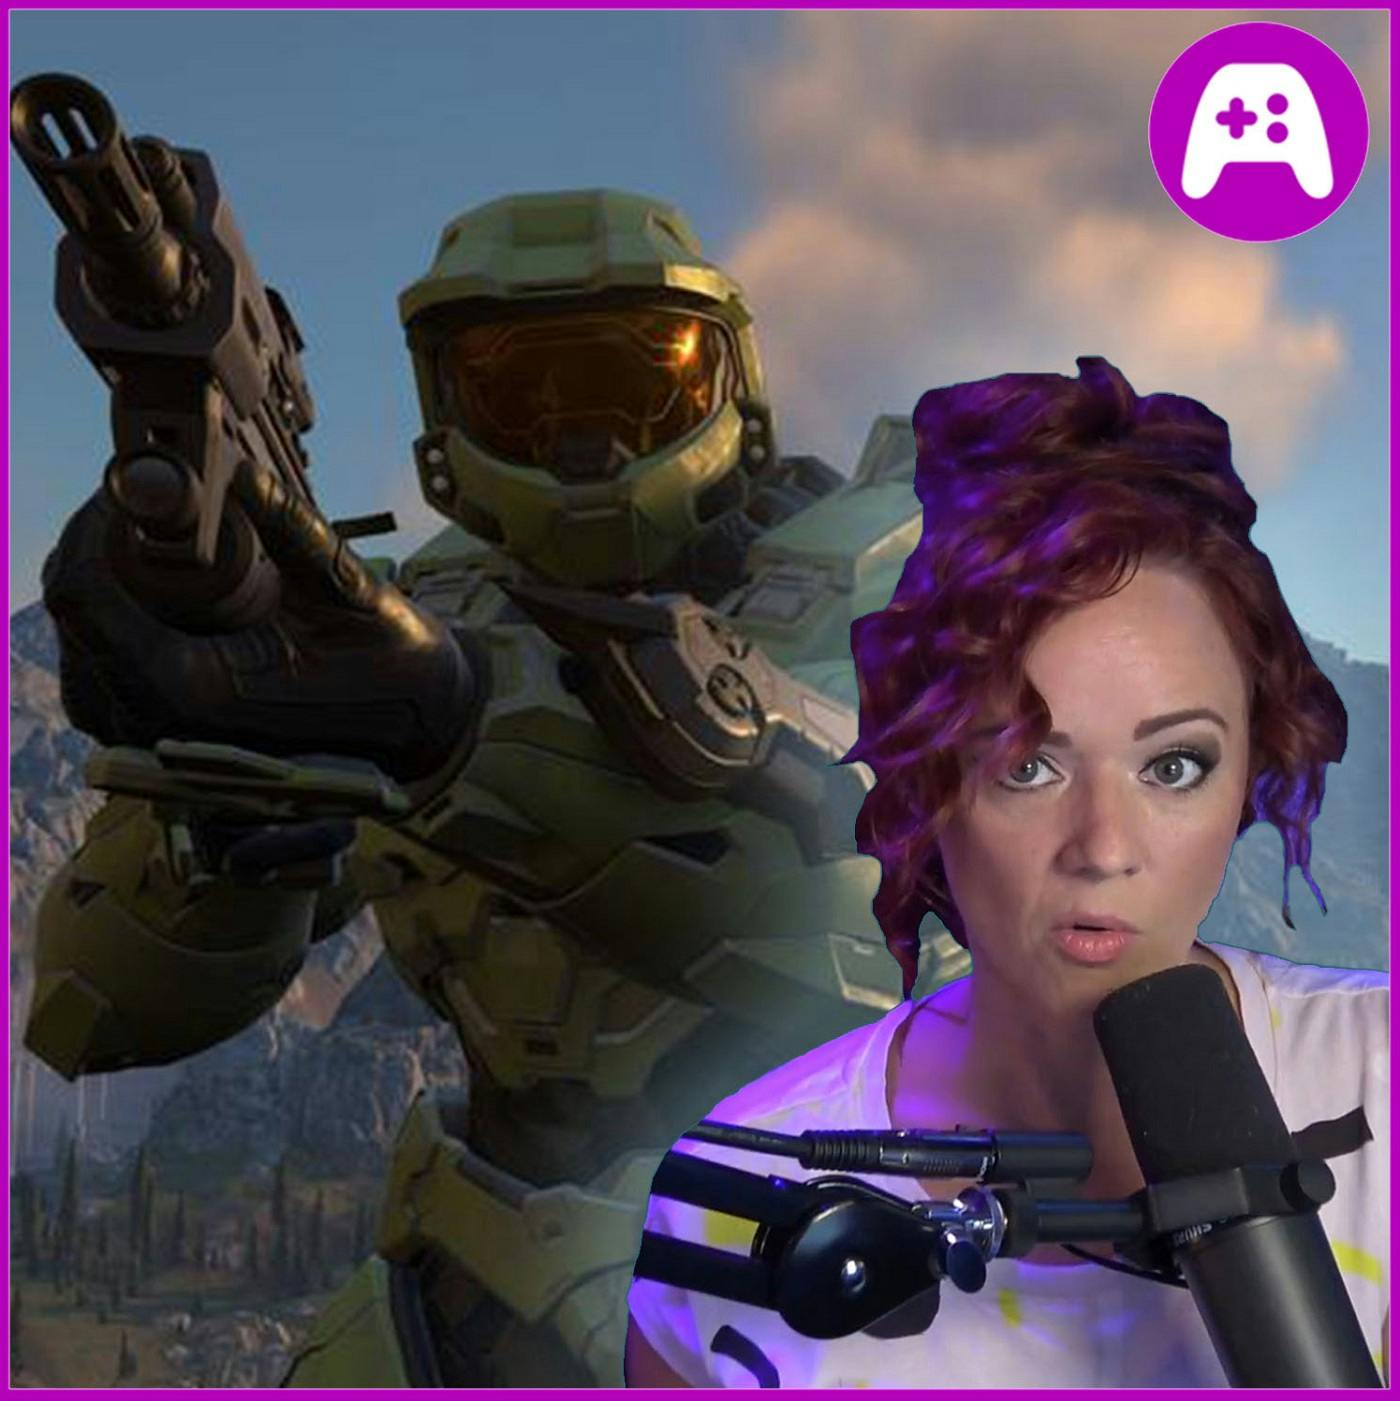 More Halo Infinite Details - What's Good Games (Ep. 177)